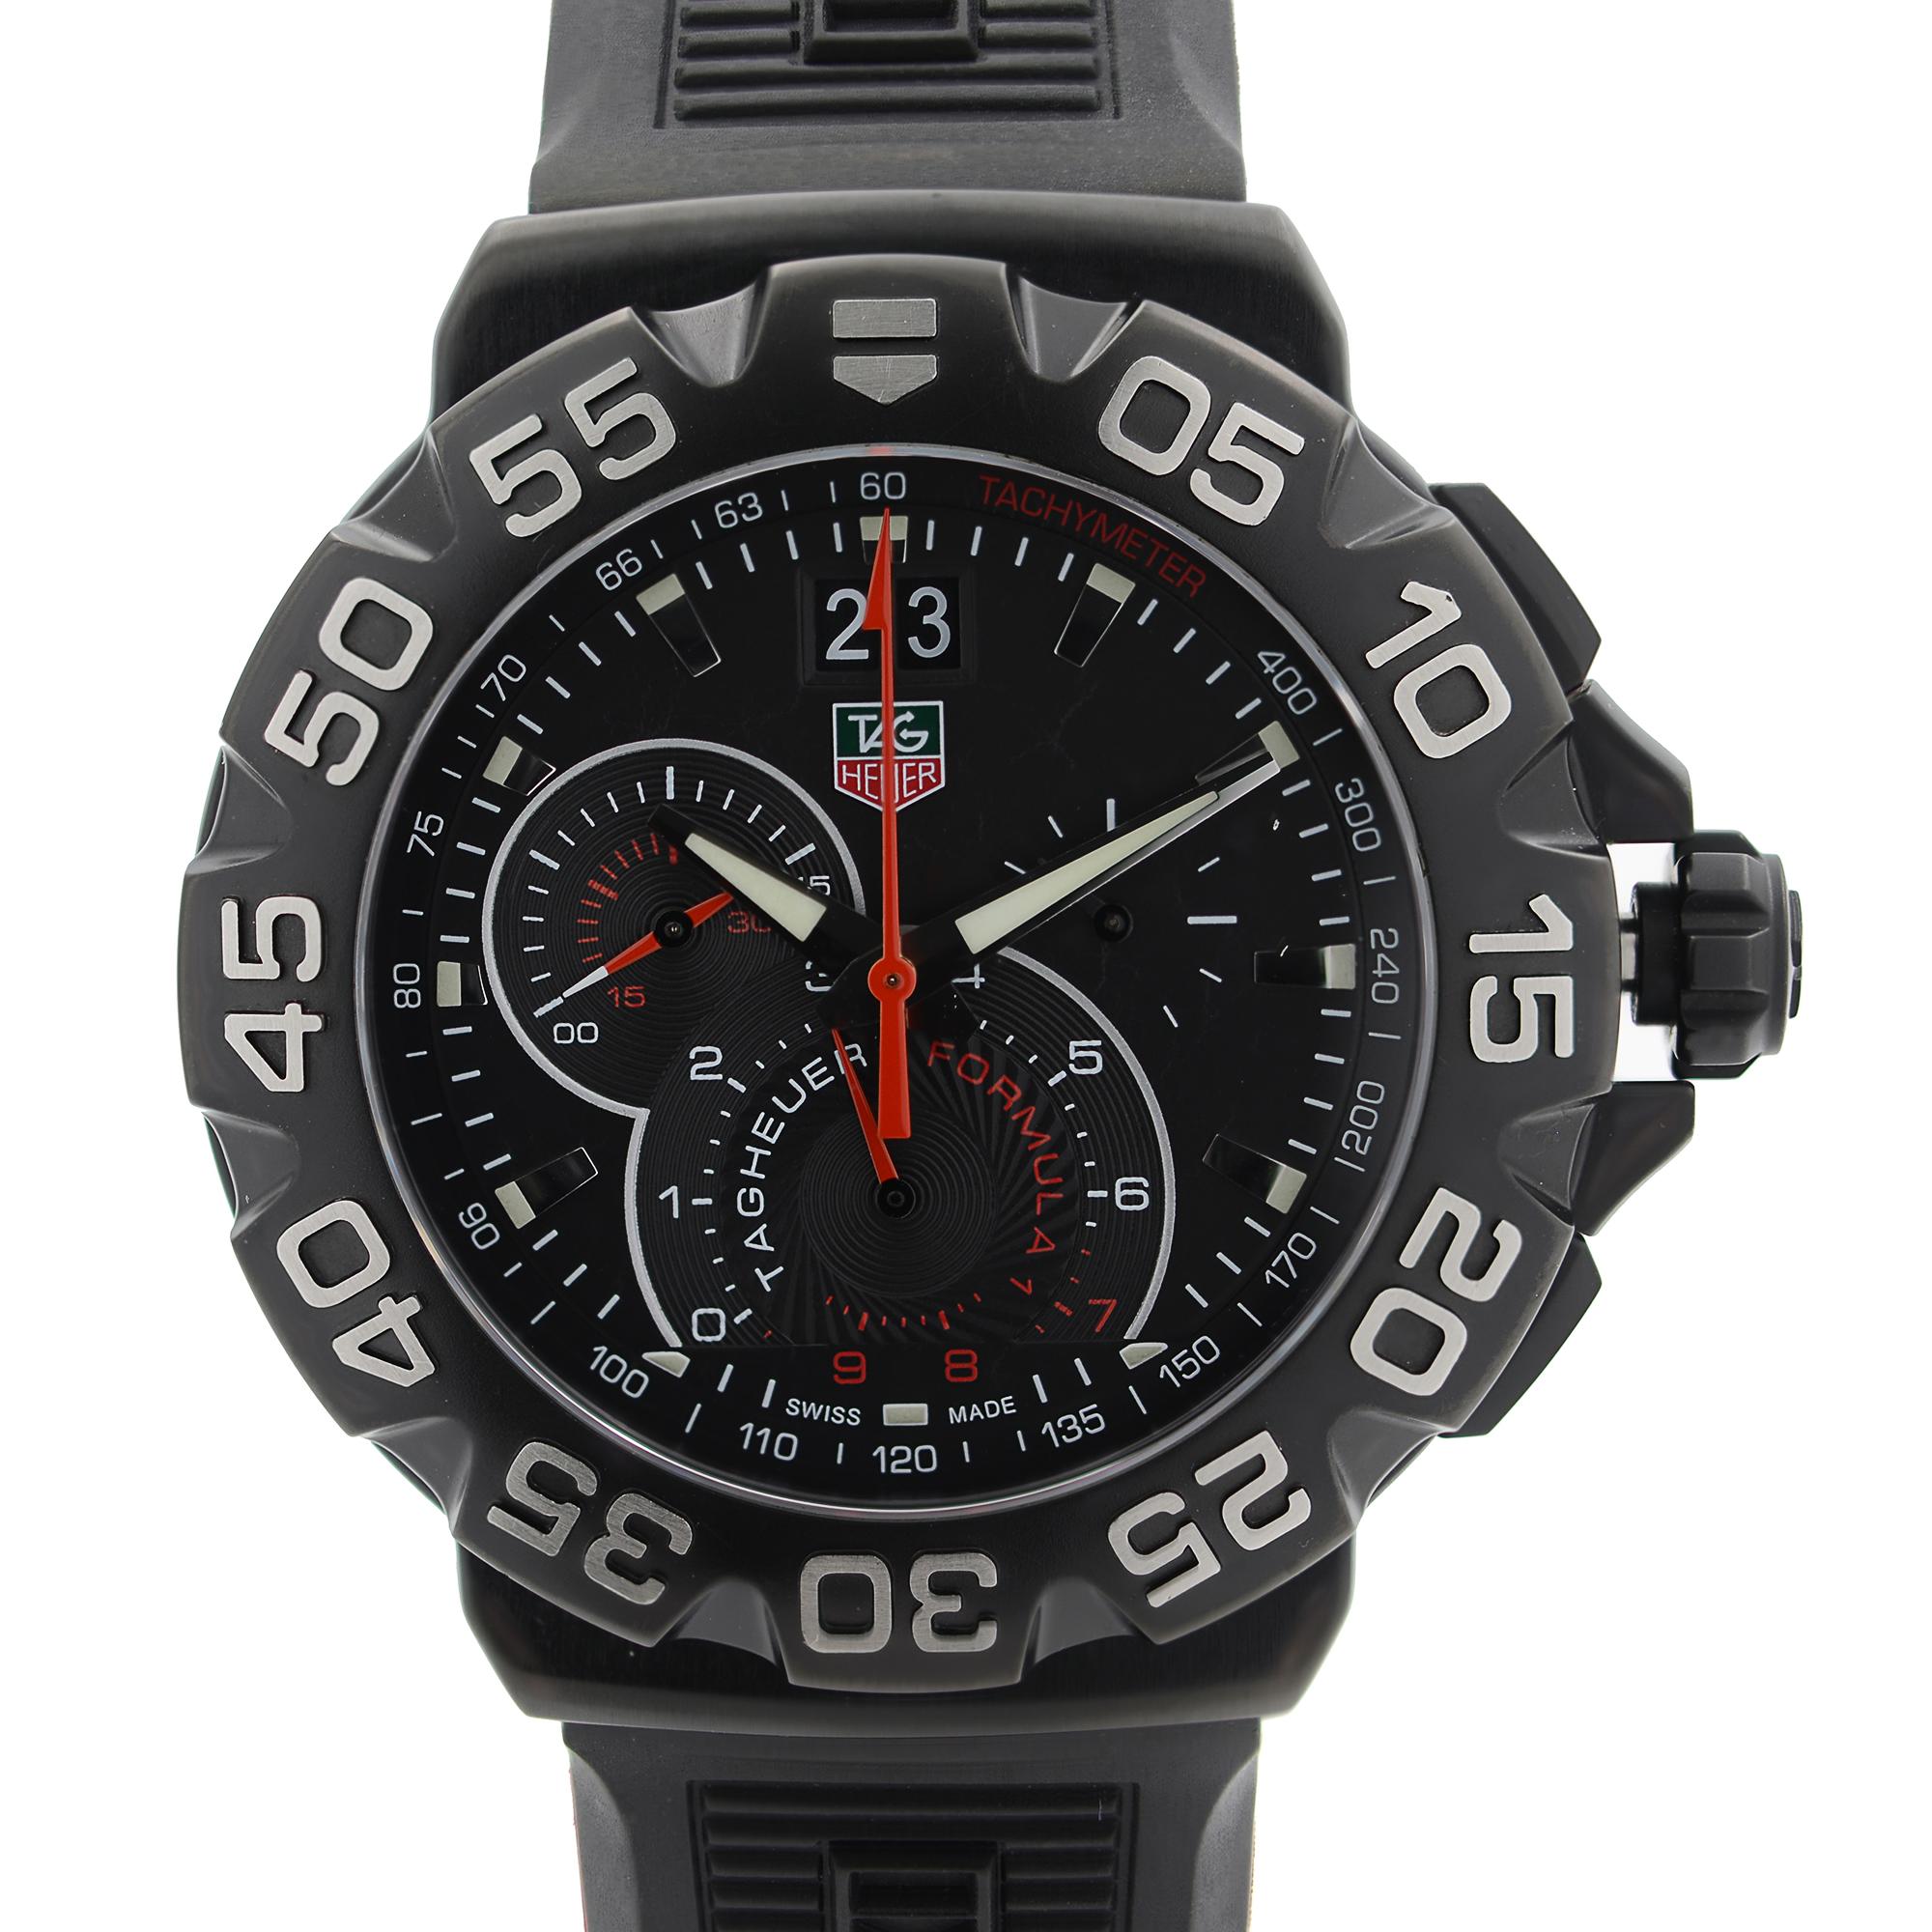 Pre-Owned TAG Heuer Formula 1 42mm Chronograph PVD Steel Quartz Men Watch CAH1012.FT6026. The Watch is empowered by a Quartz Movement. This Beautiful Timepiece Features: Black PVD Coated Stainless Steel Case and Two-Piece Rubber Strap.